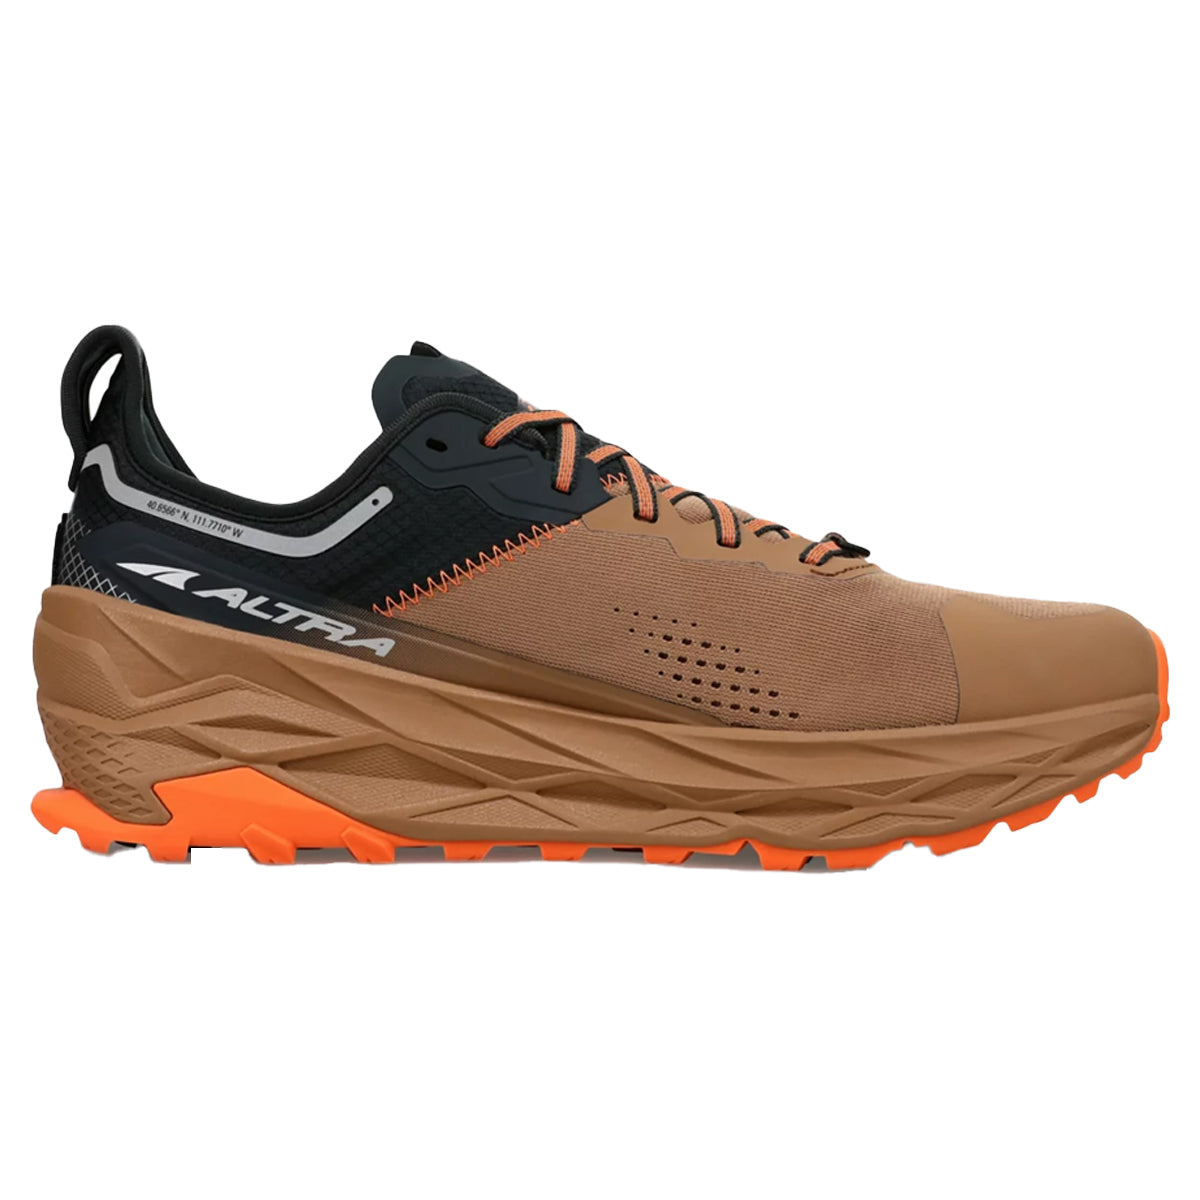 Altra Olympus 5 in Brown by GOHUNT | Altra - GOHUNT Shop